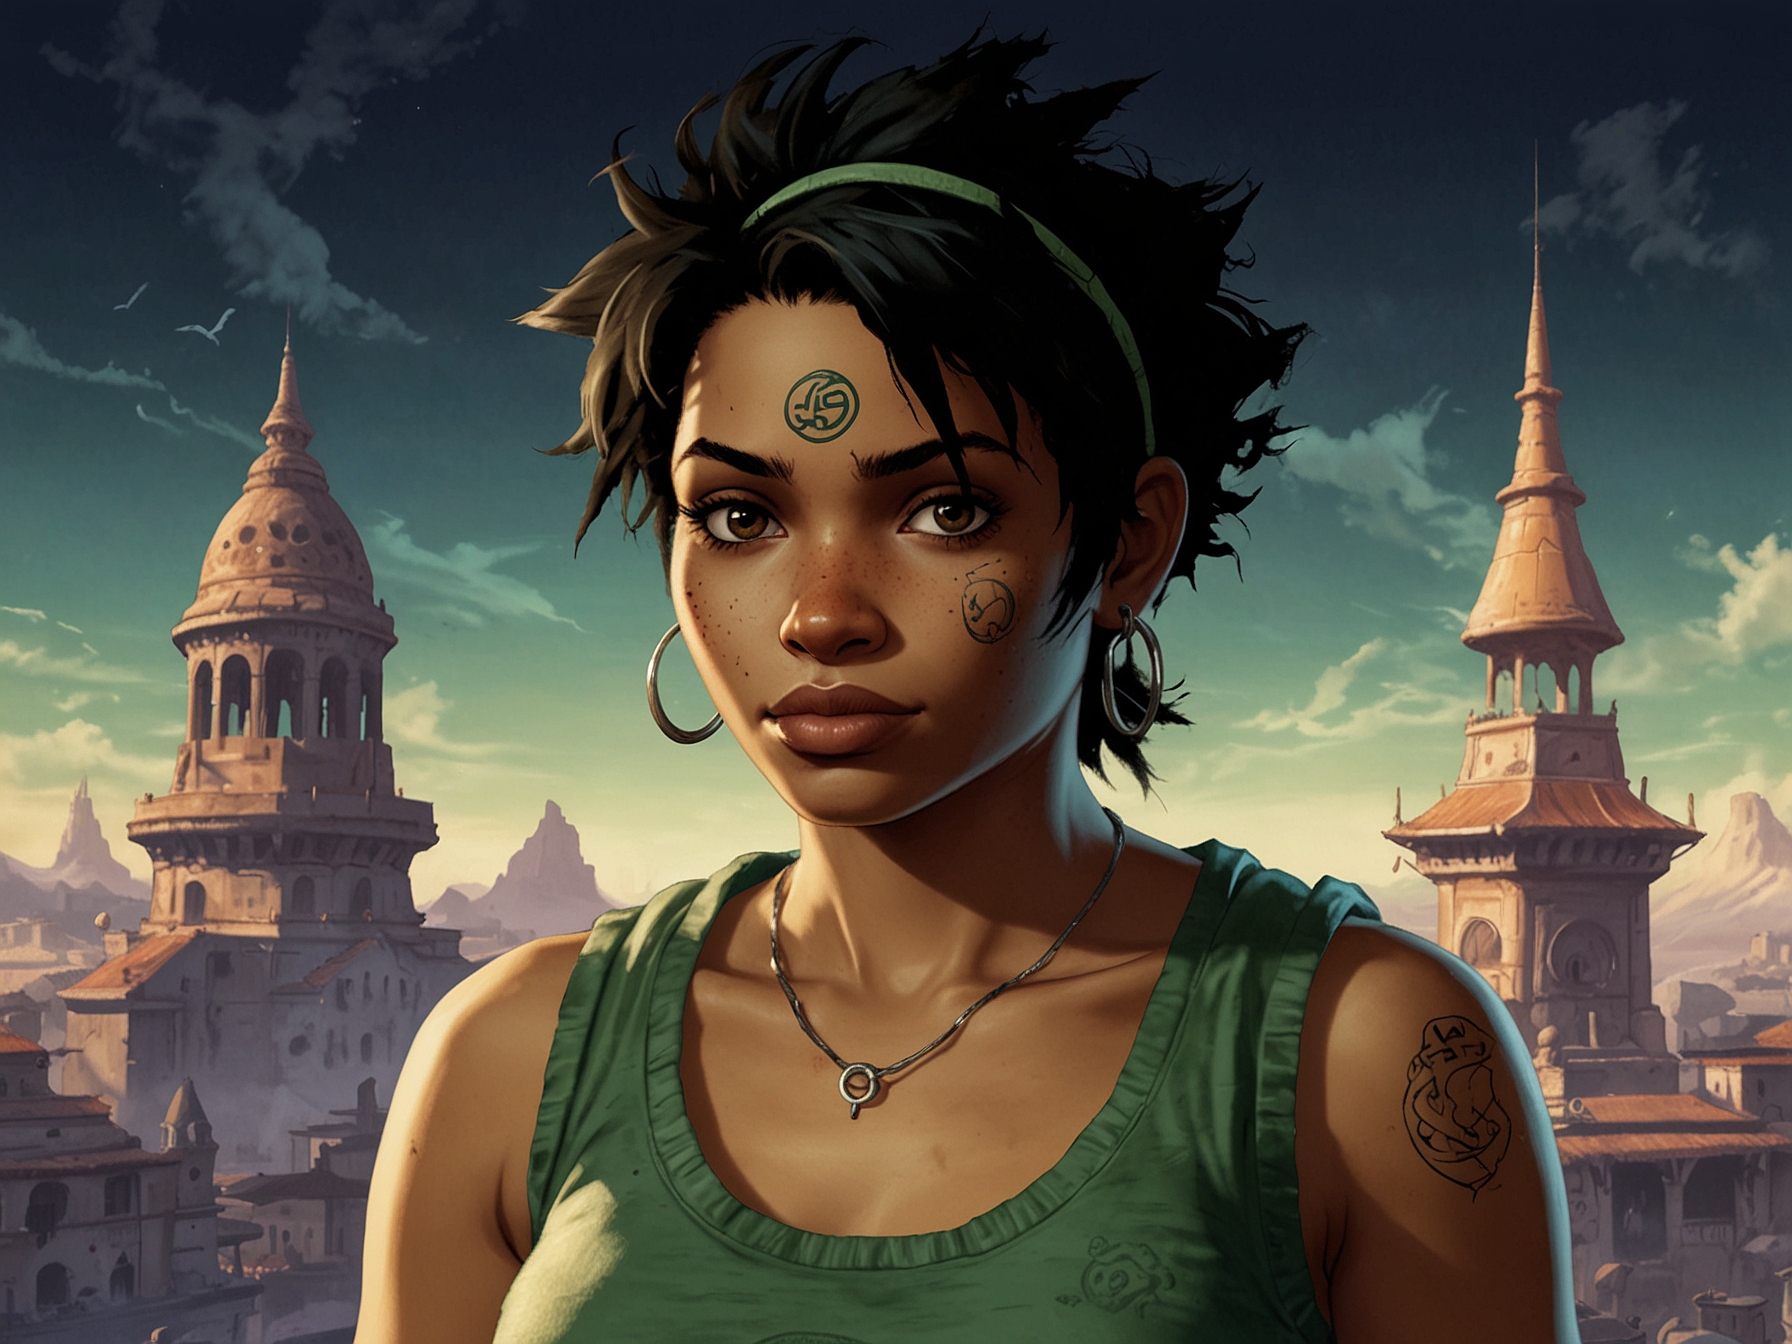 The remastered Beyond Good and Evil - 20th Anniversary Edition showcases vibrant, high-definition re-imagined landscapes and character models, breathing new life into the beloved 2003 action-adventure game.